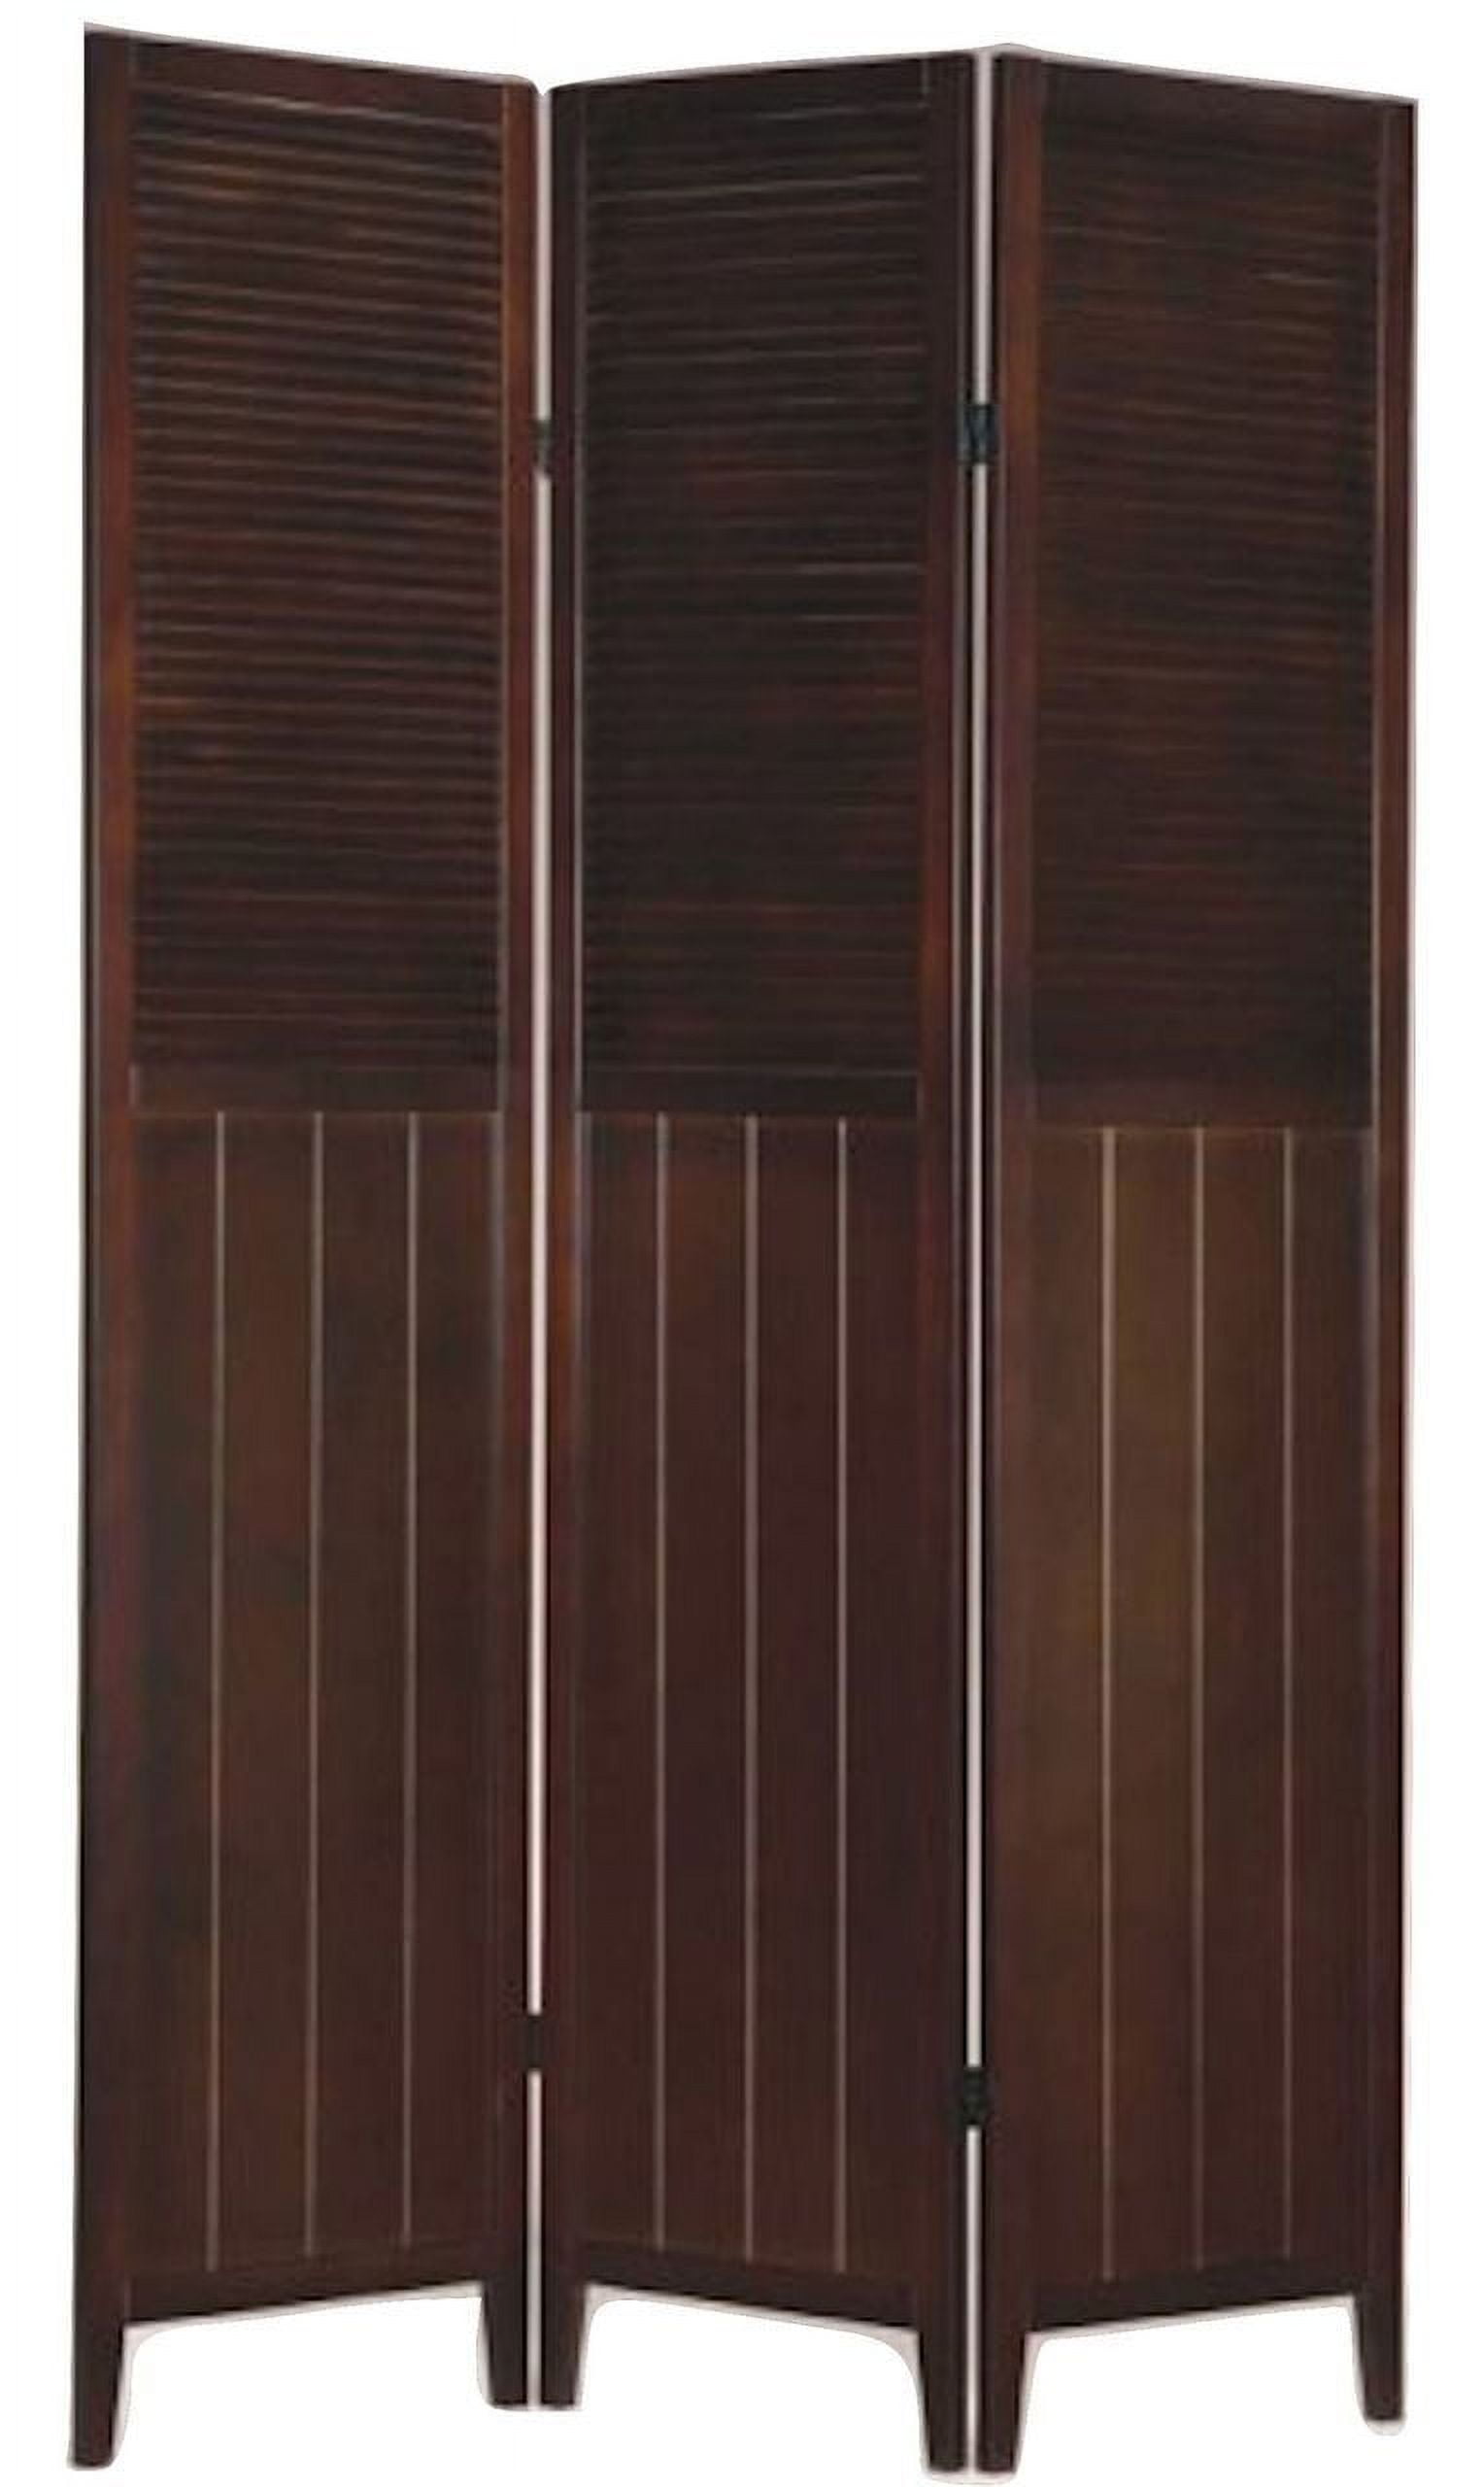 Legacy Decor Solid Wood Shutter 3 Panel Room Divider, 71" Tall, Espresso - image 1 of 3